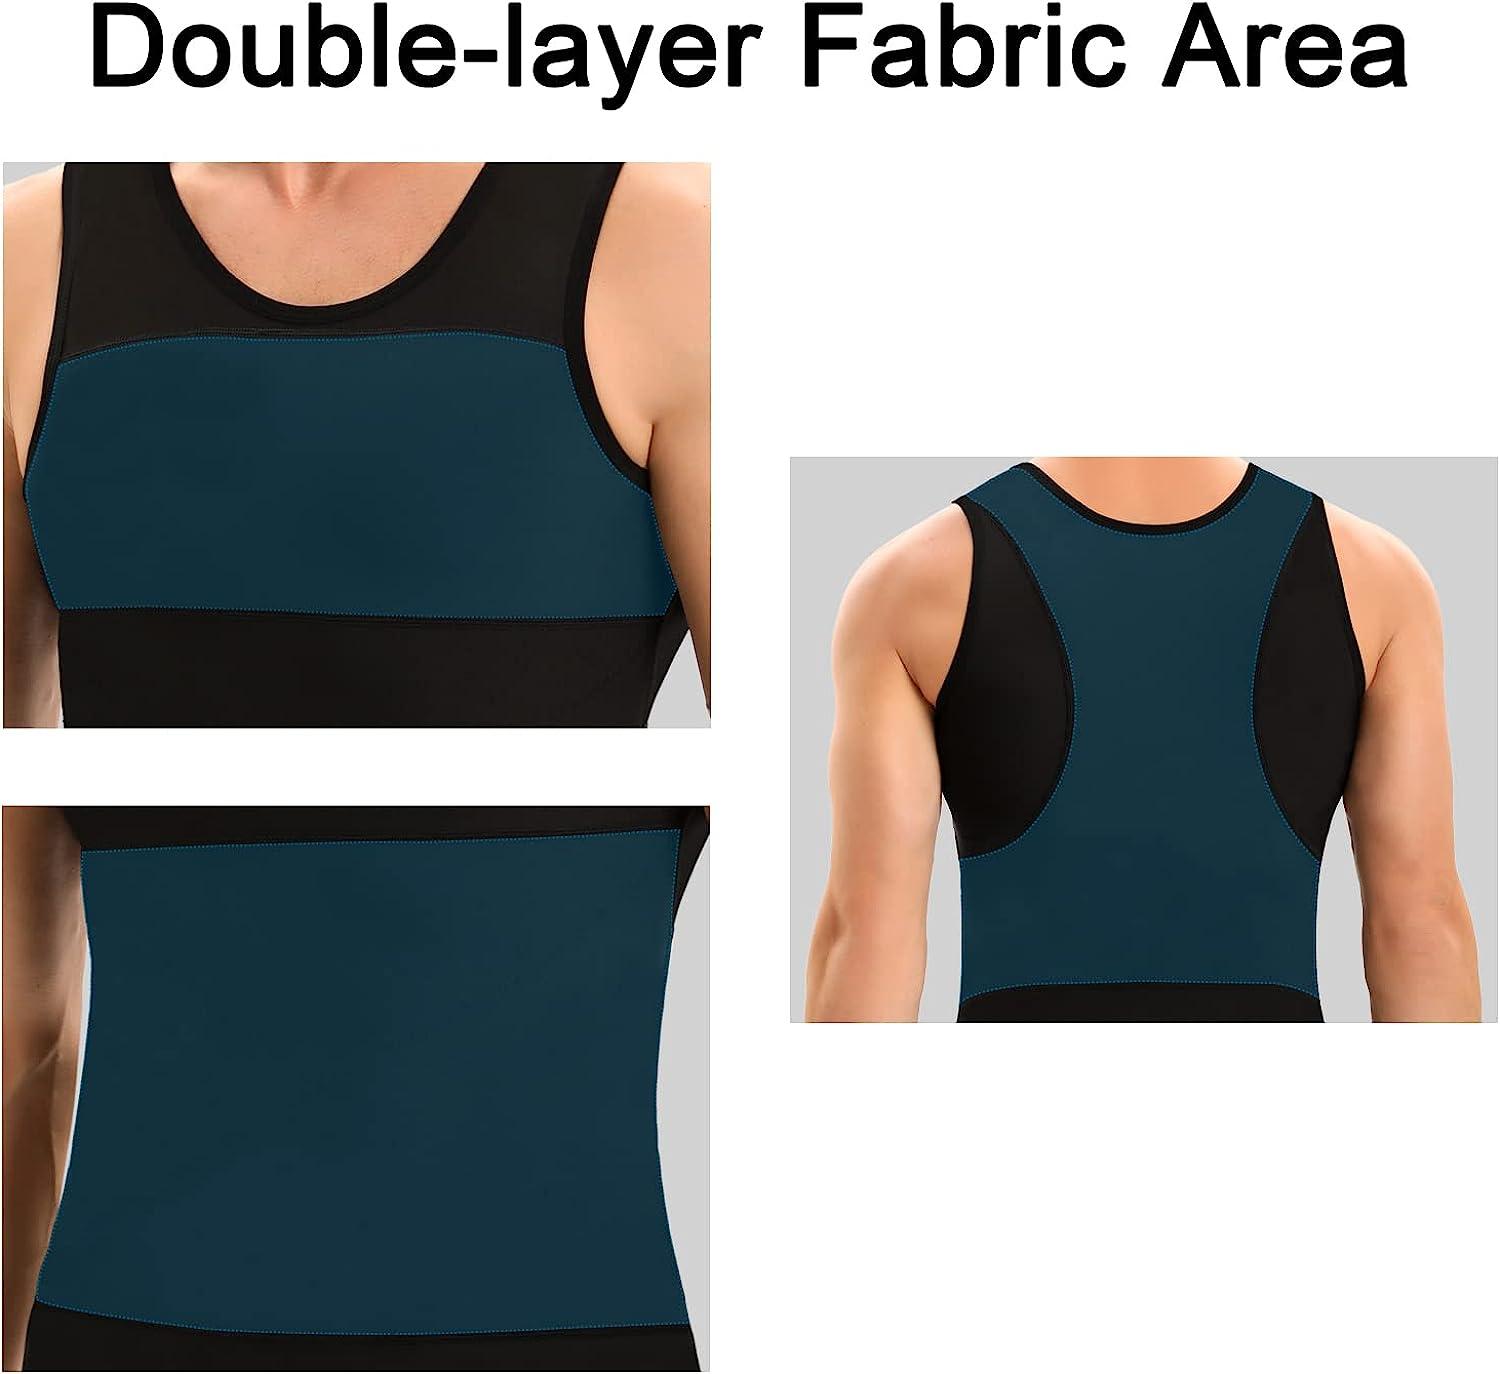 Women's Sleeveless Top Compression Shirt Slimming Vest Camisole